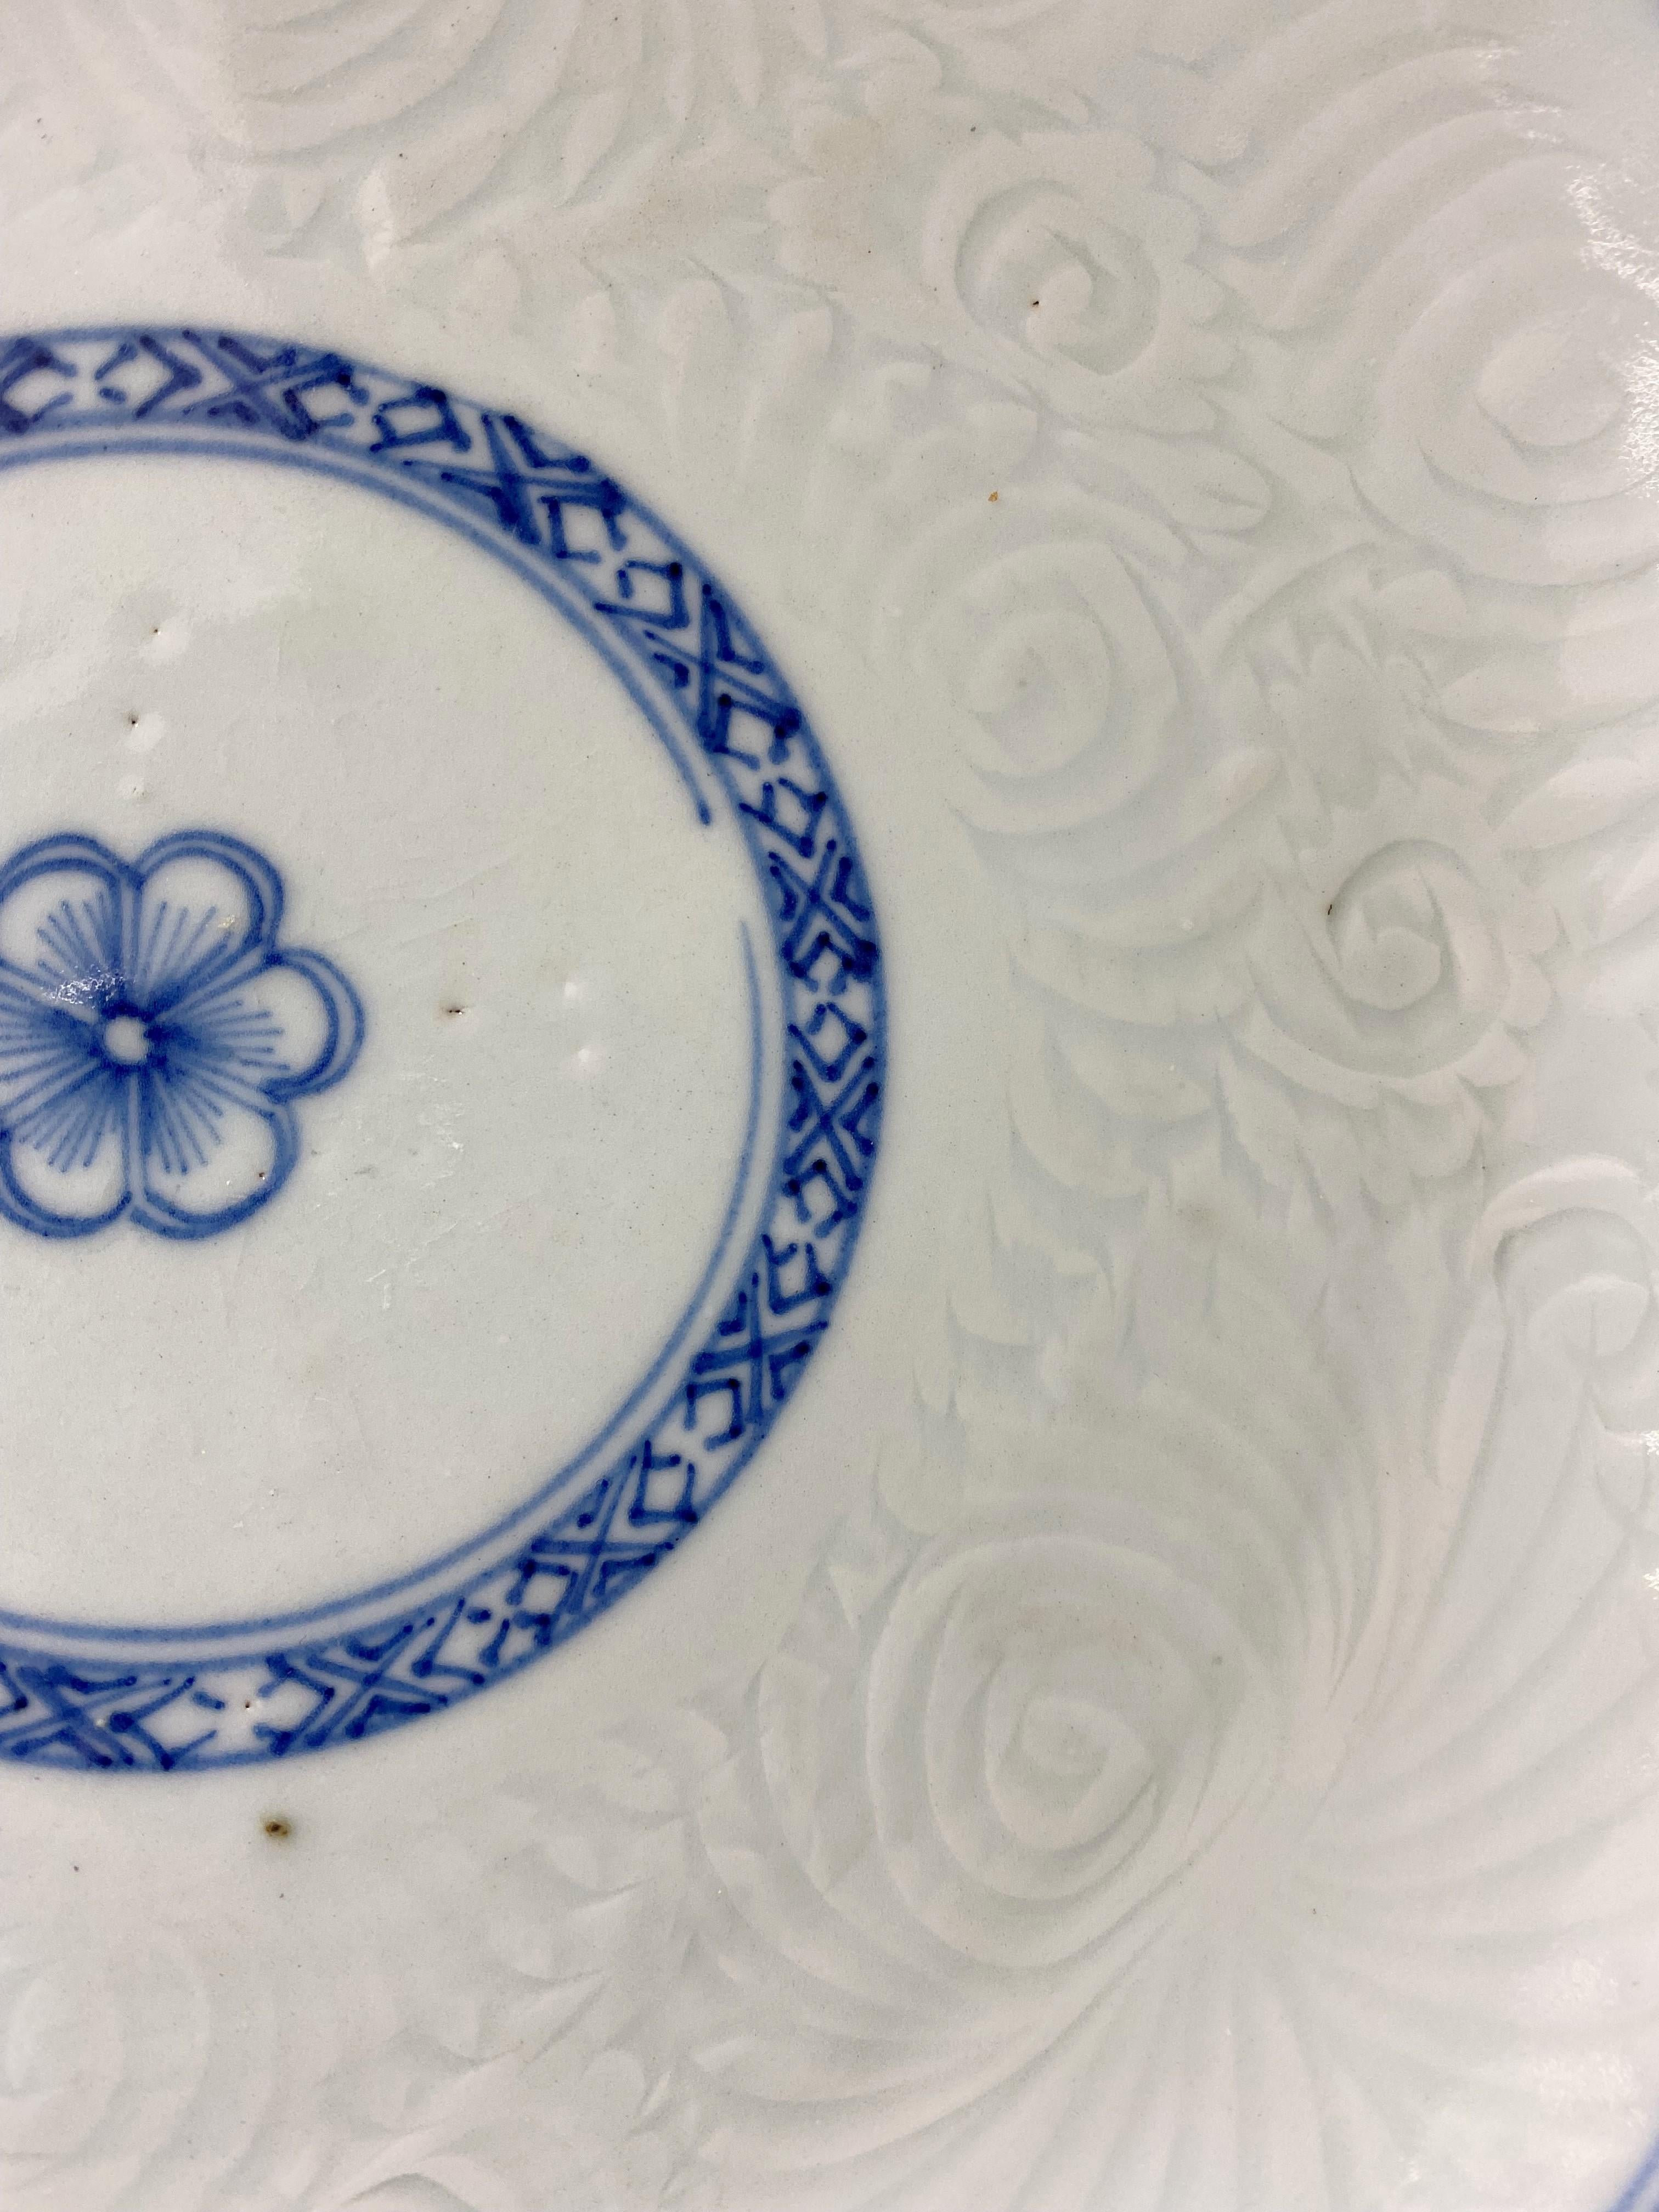 Porcelain Chinese Plate Inspired by the Blue Family India Compagny, Mid 19th Century For Sale